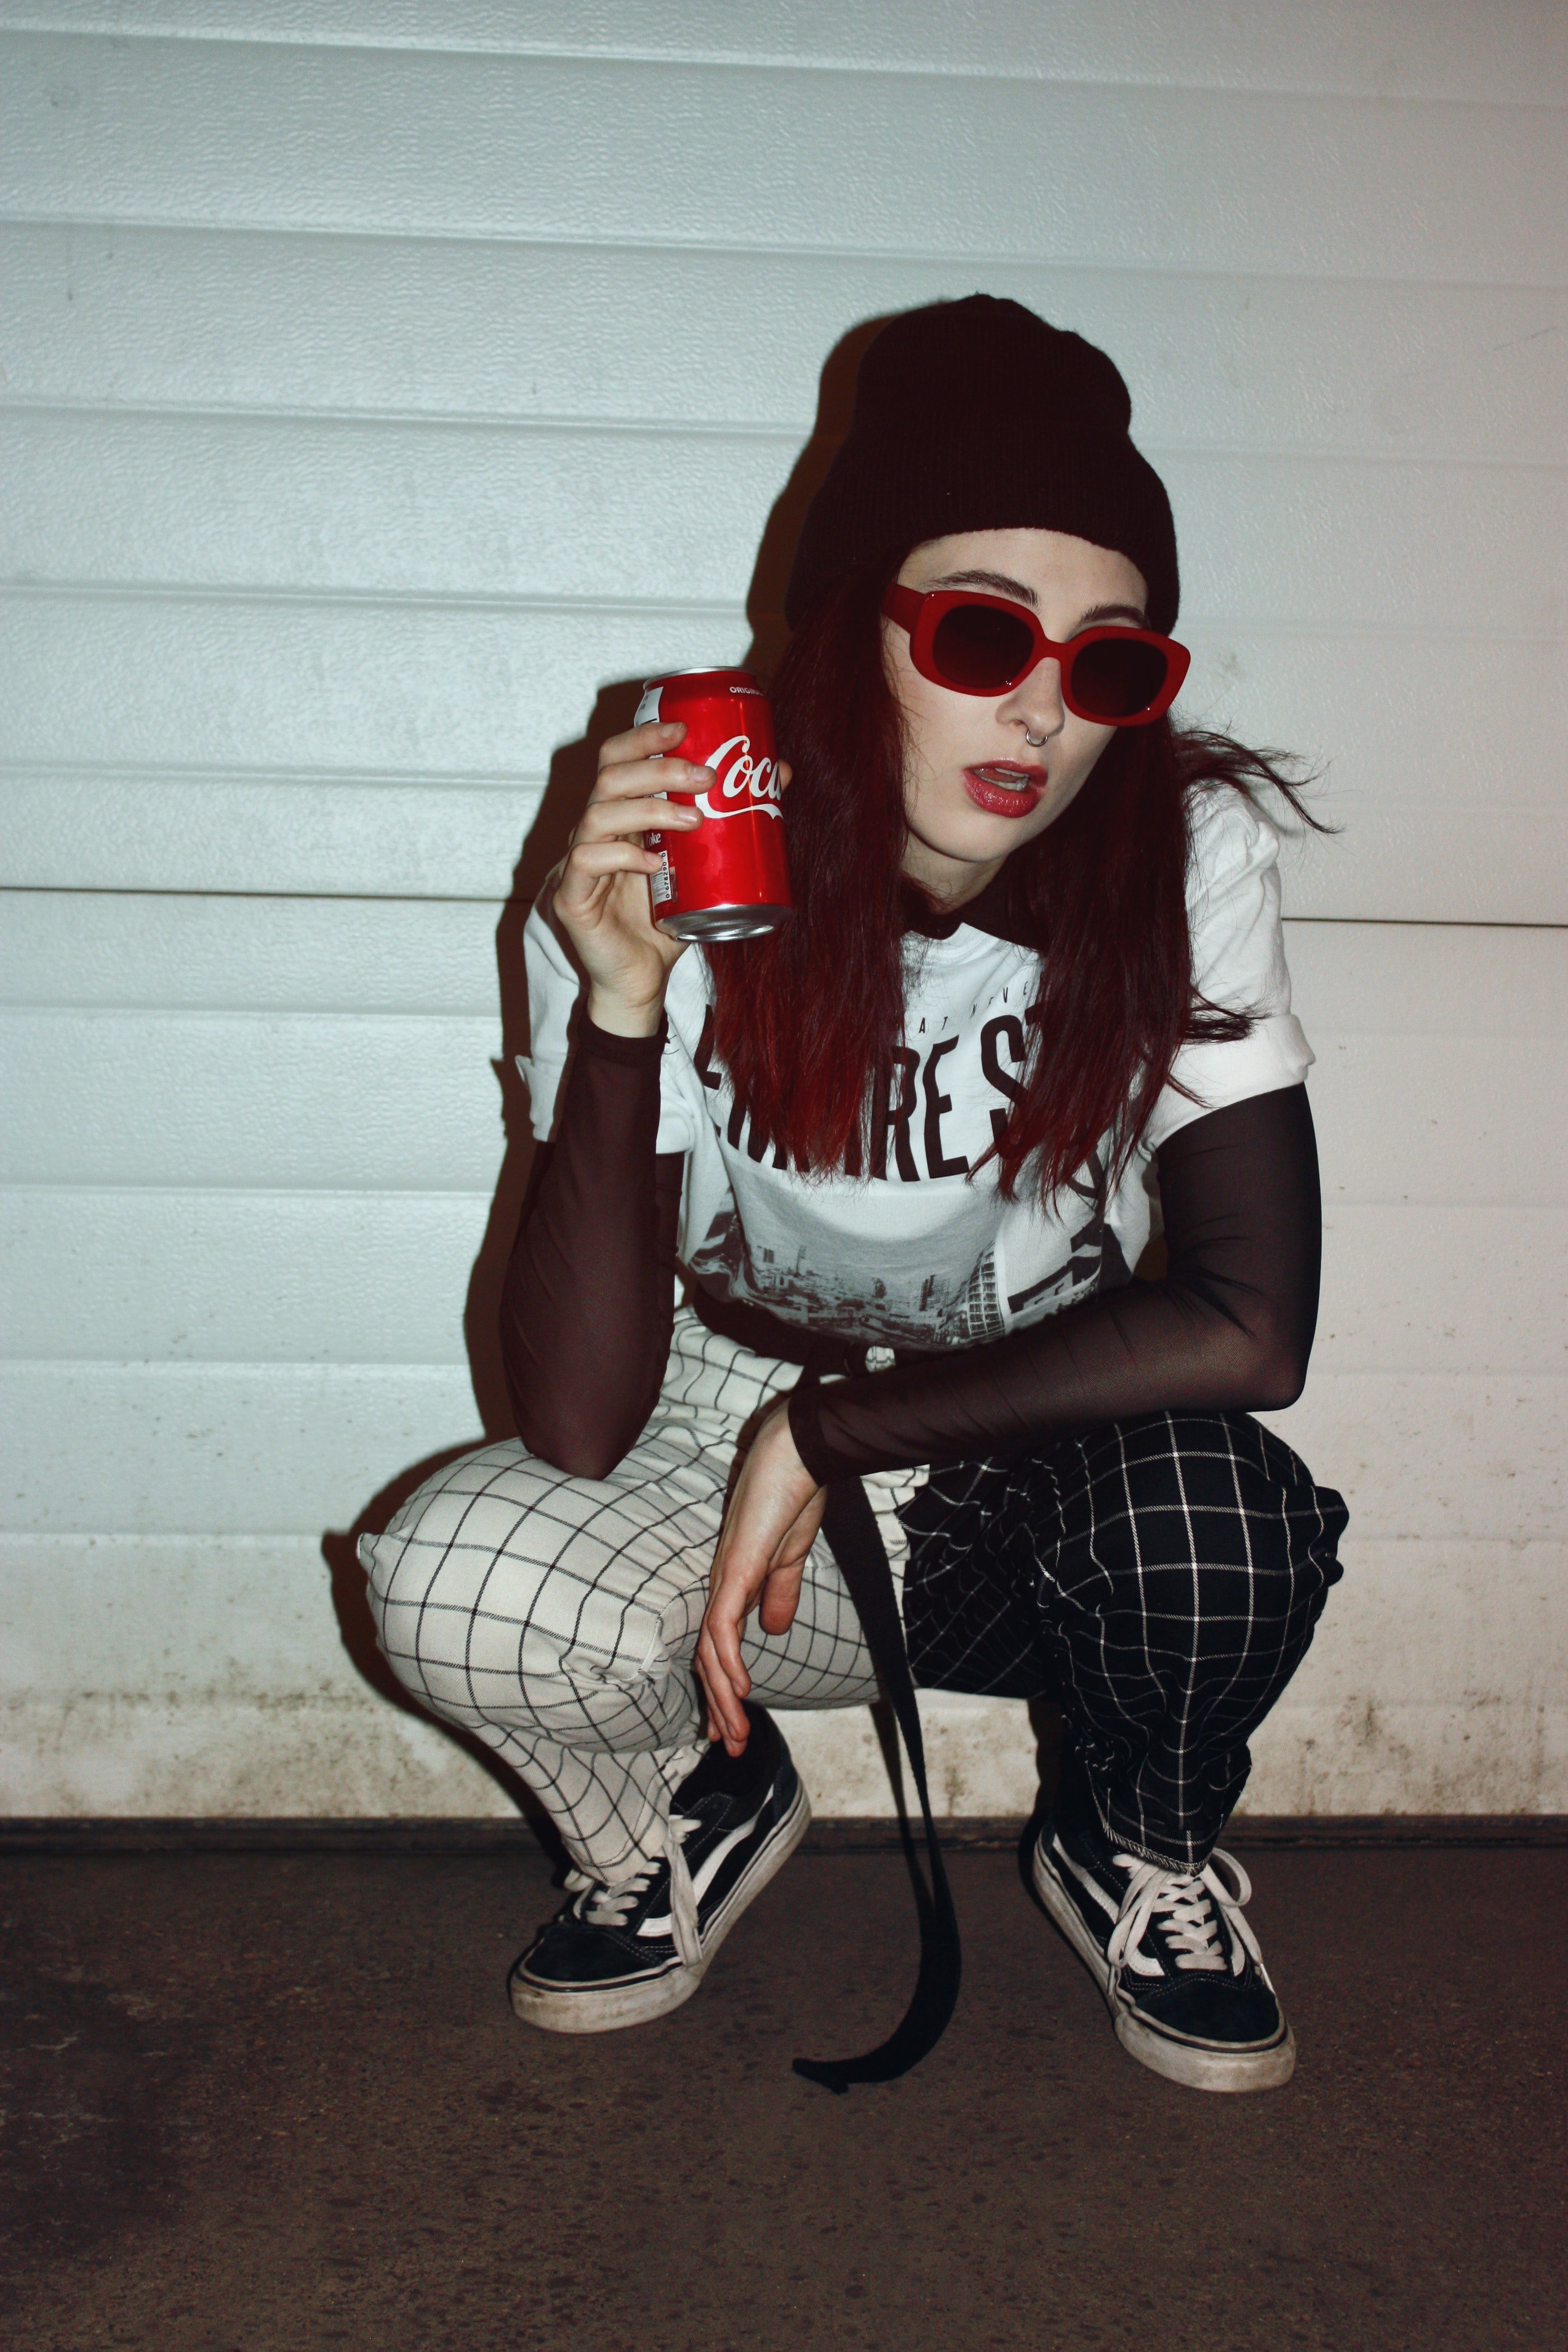 Woman holding a soft drink can | Source: Unsplash